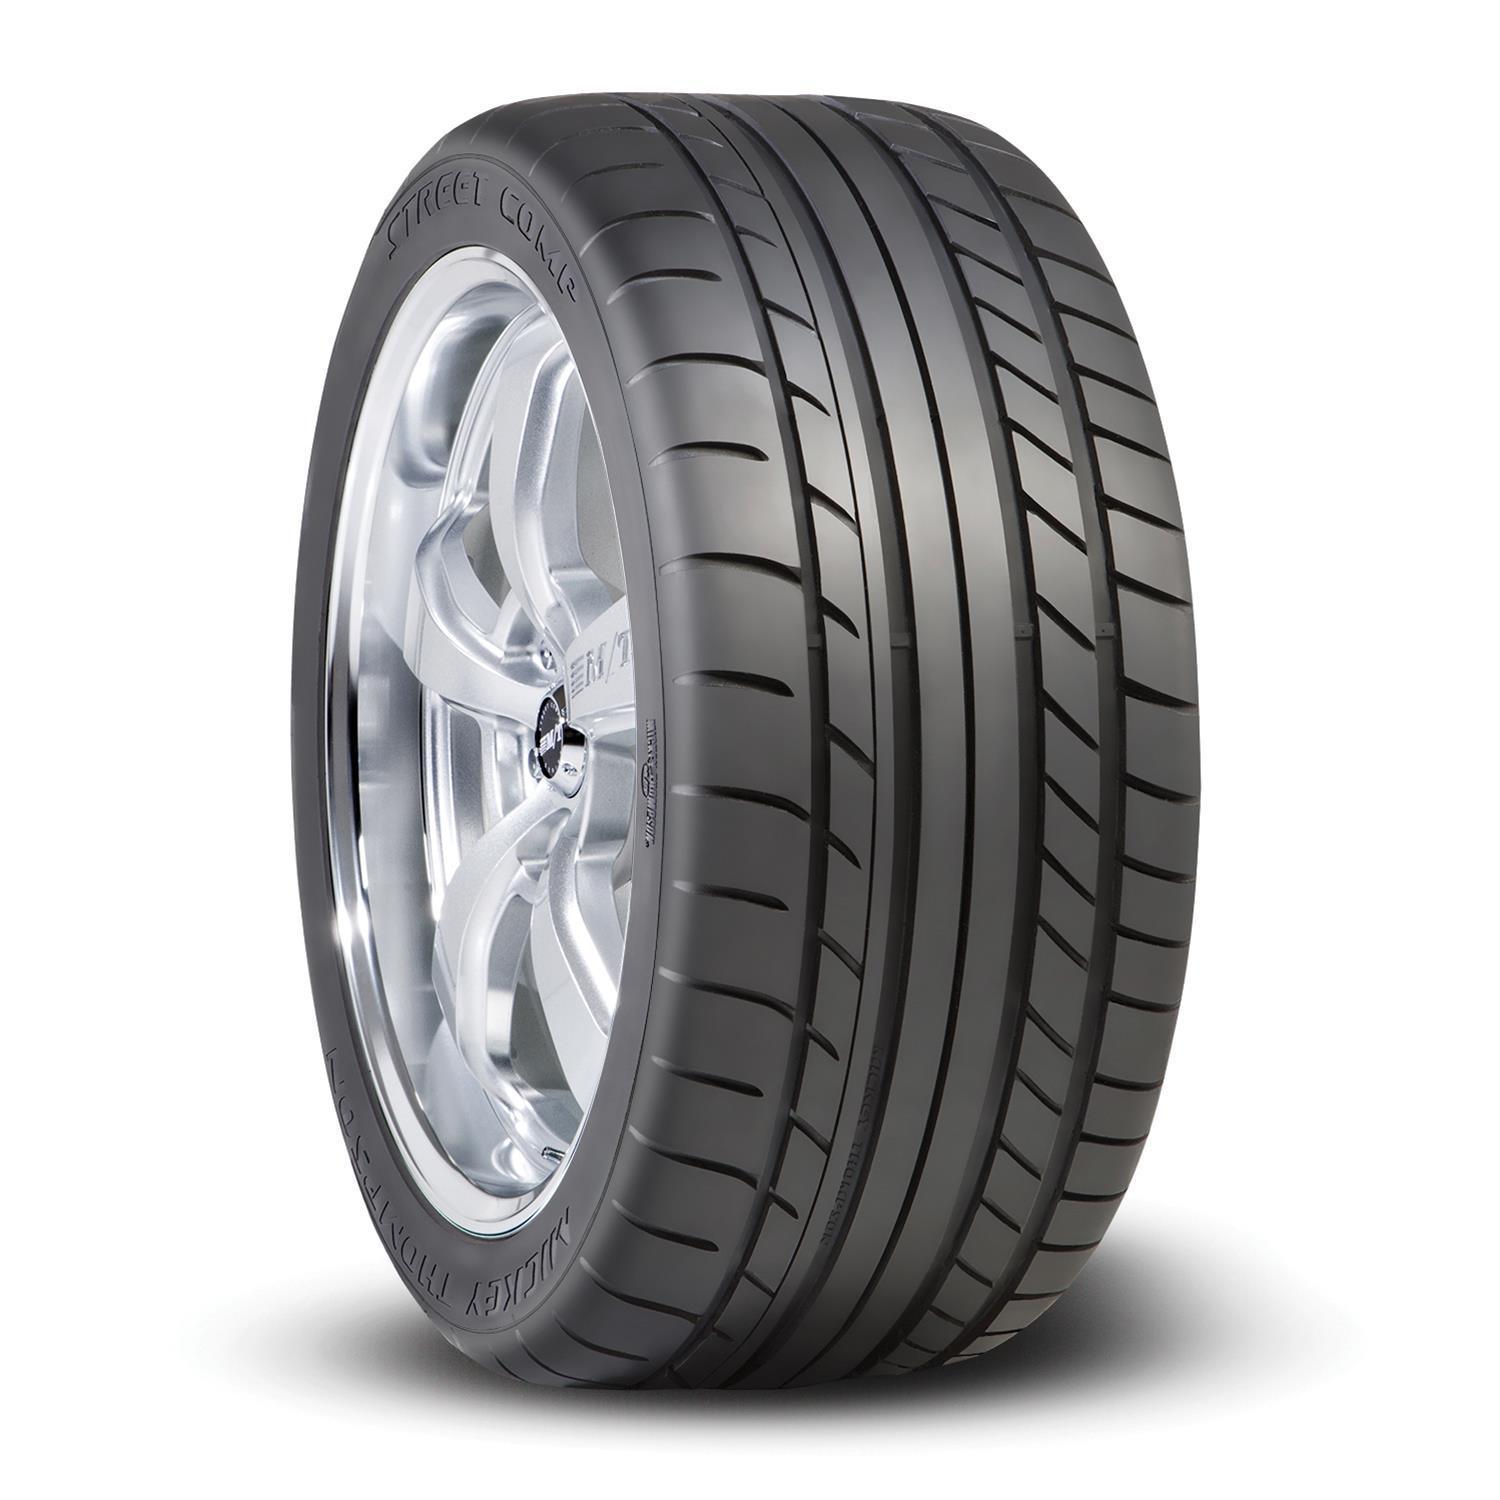 255/45R18 UHP Street Comp Tire - Burlile Performance Products